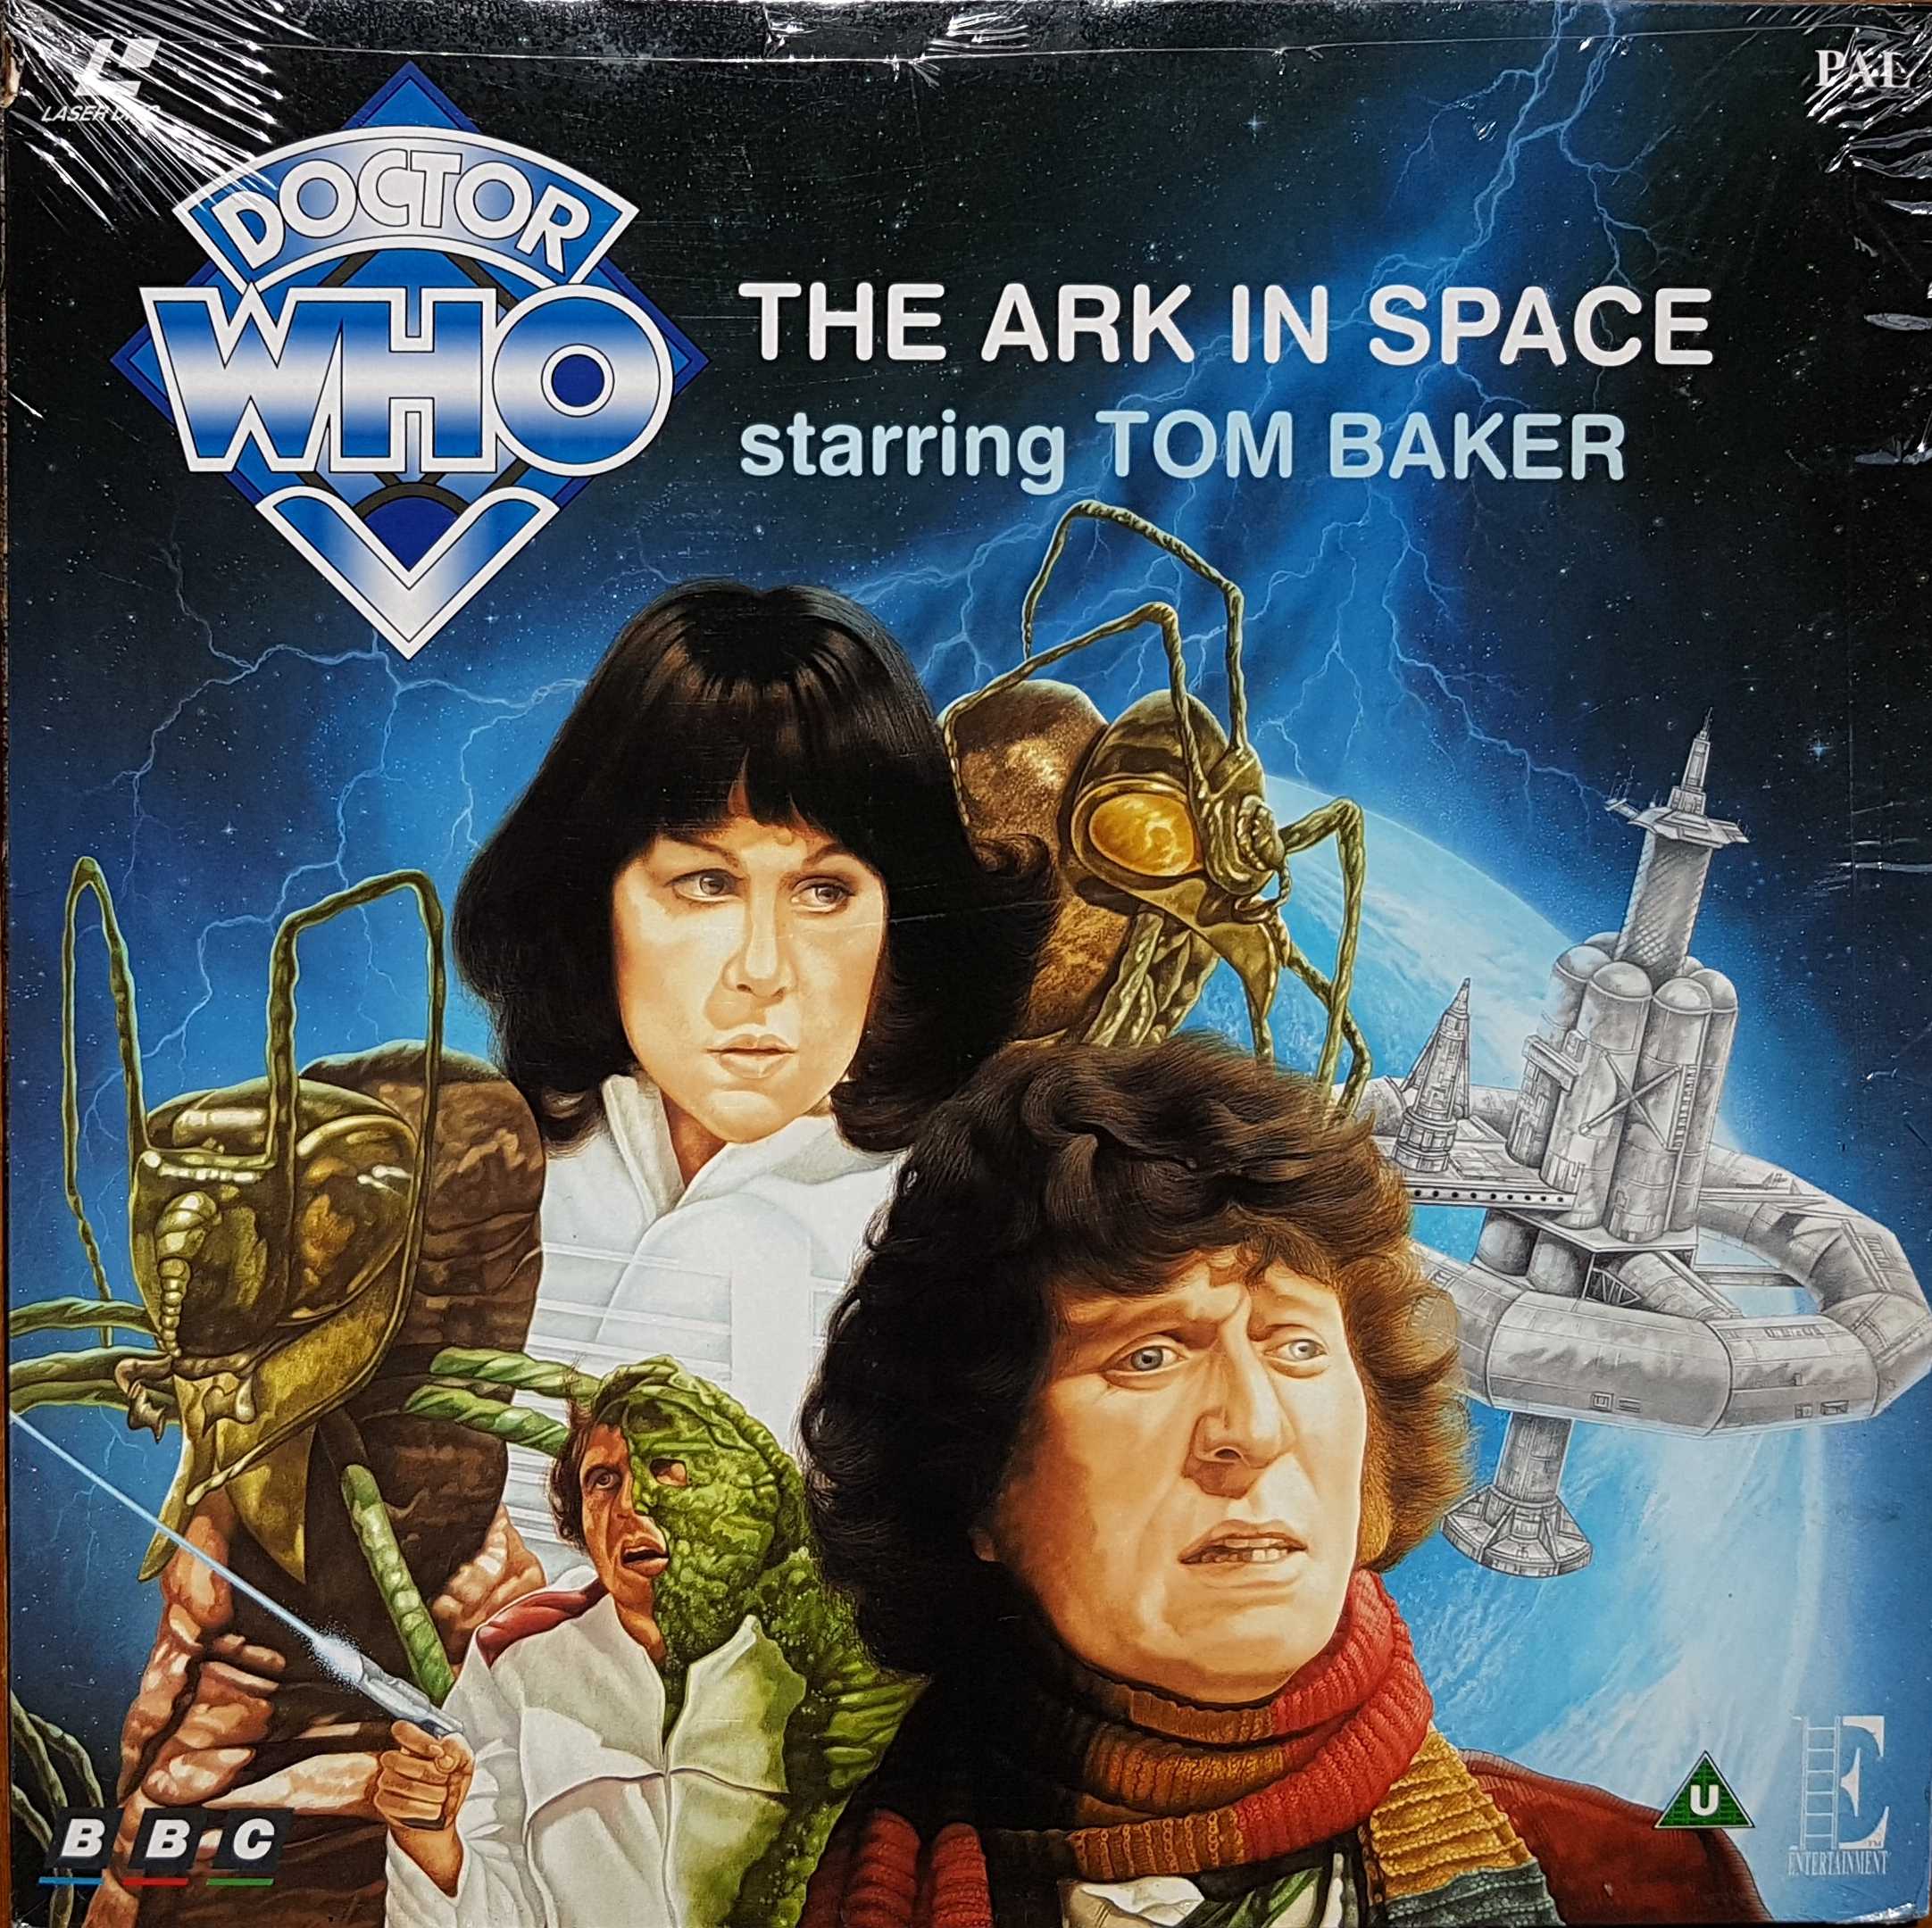 Picture of EE 1158 Doctor Who - The ark in space by artist Robert Holmes / John Lucarotti from the BBC records and Tapes library